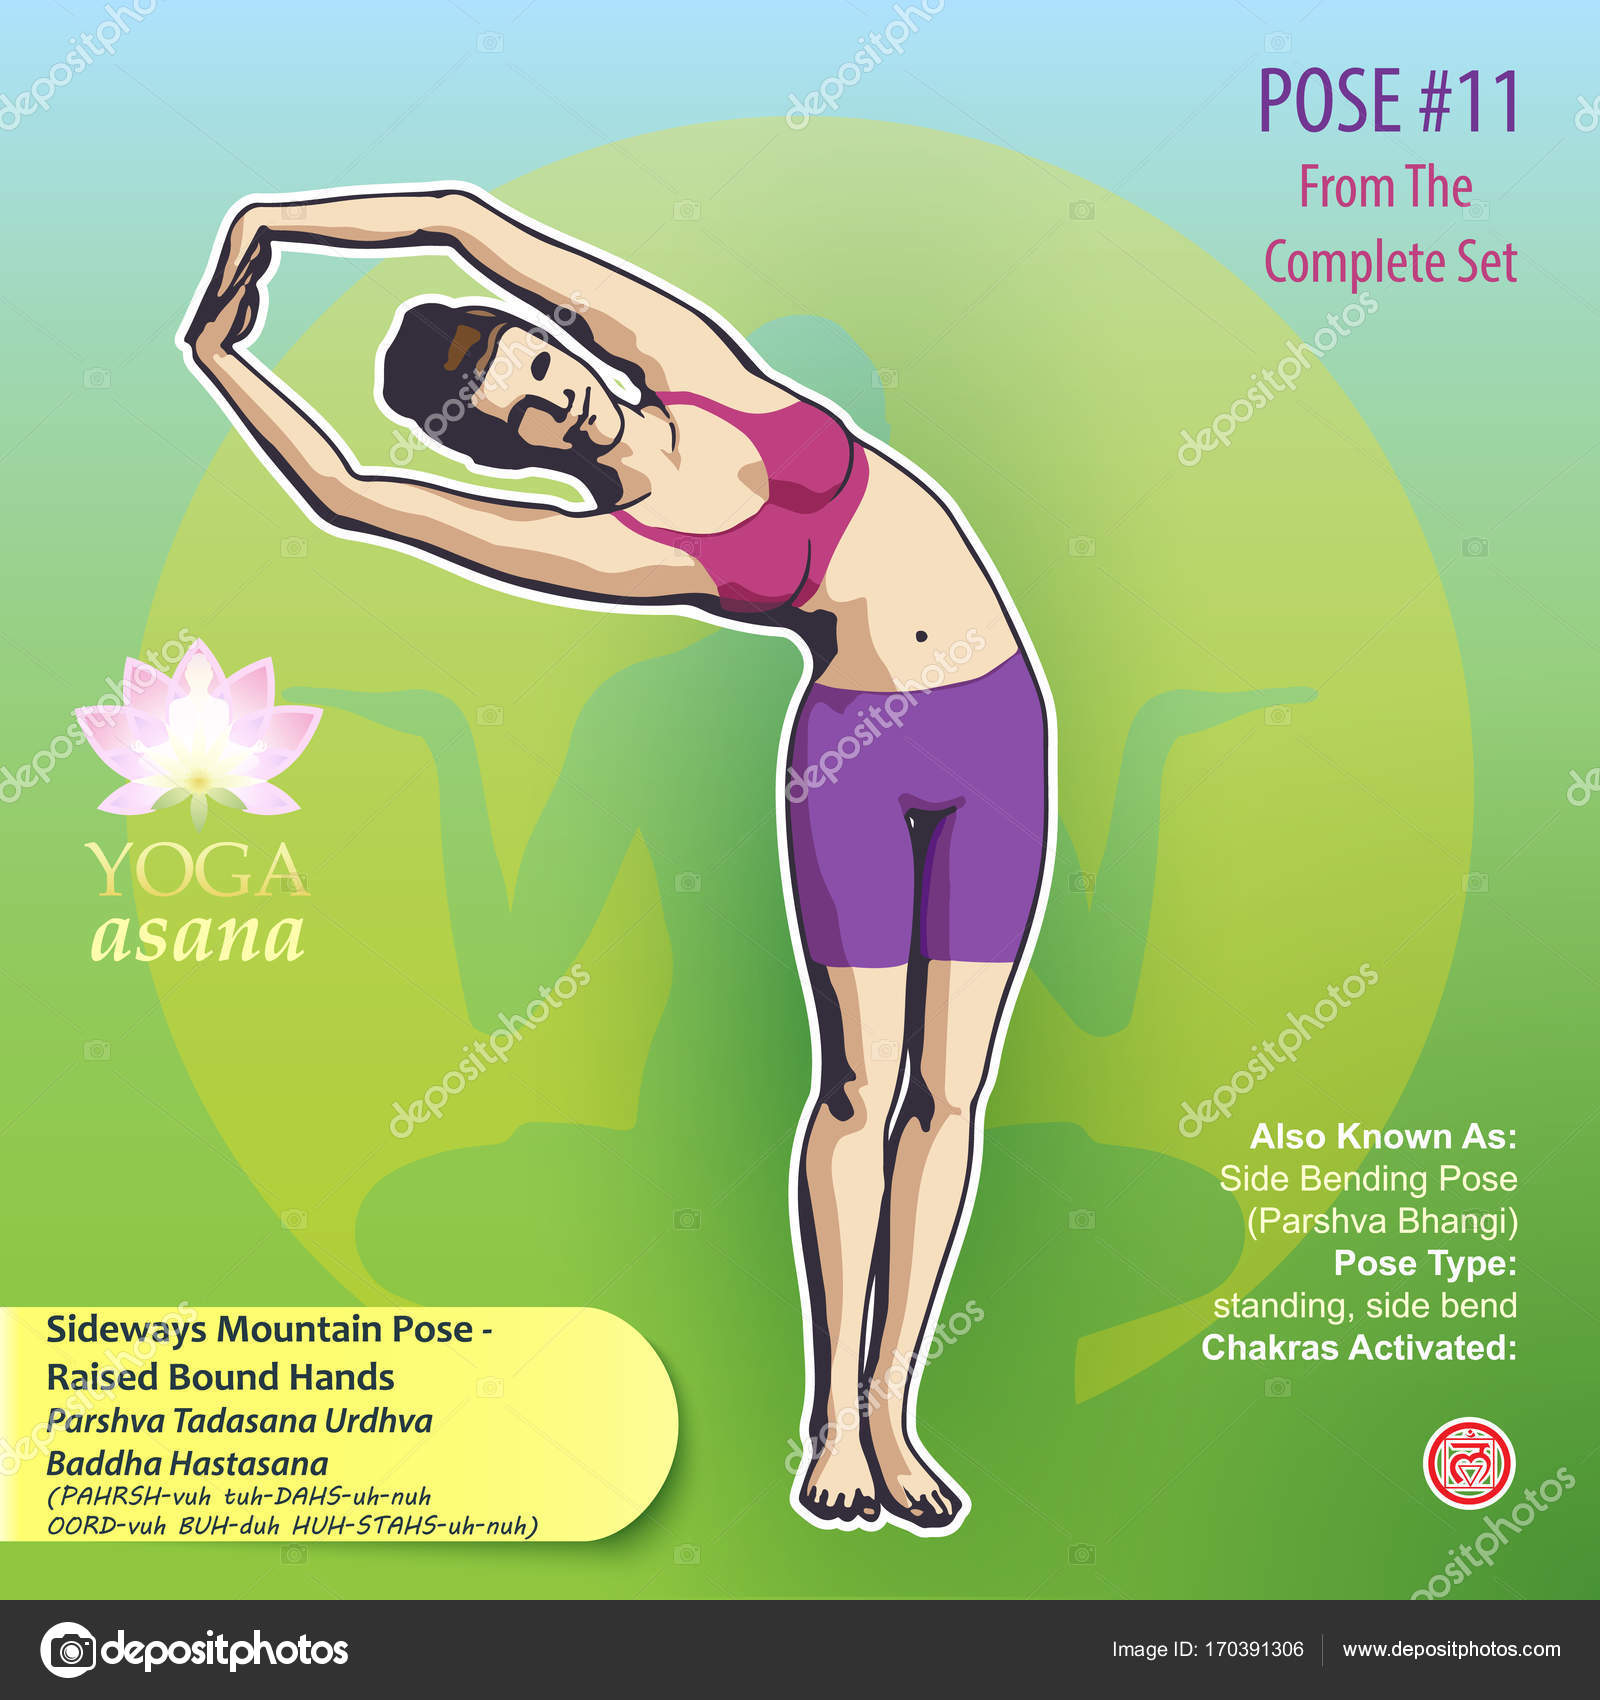 Yoga Asanas: Yoga Poses (with images) Standing, Sitting, and Lying Down -  The Art of Living